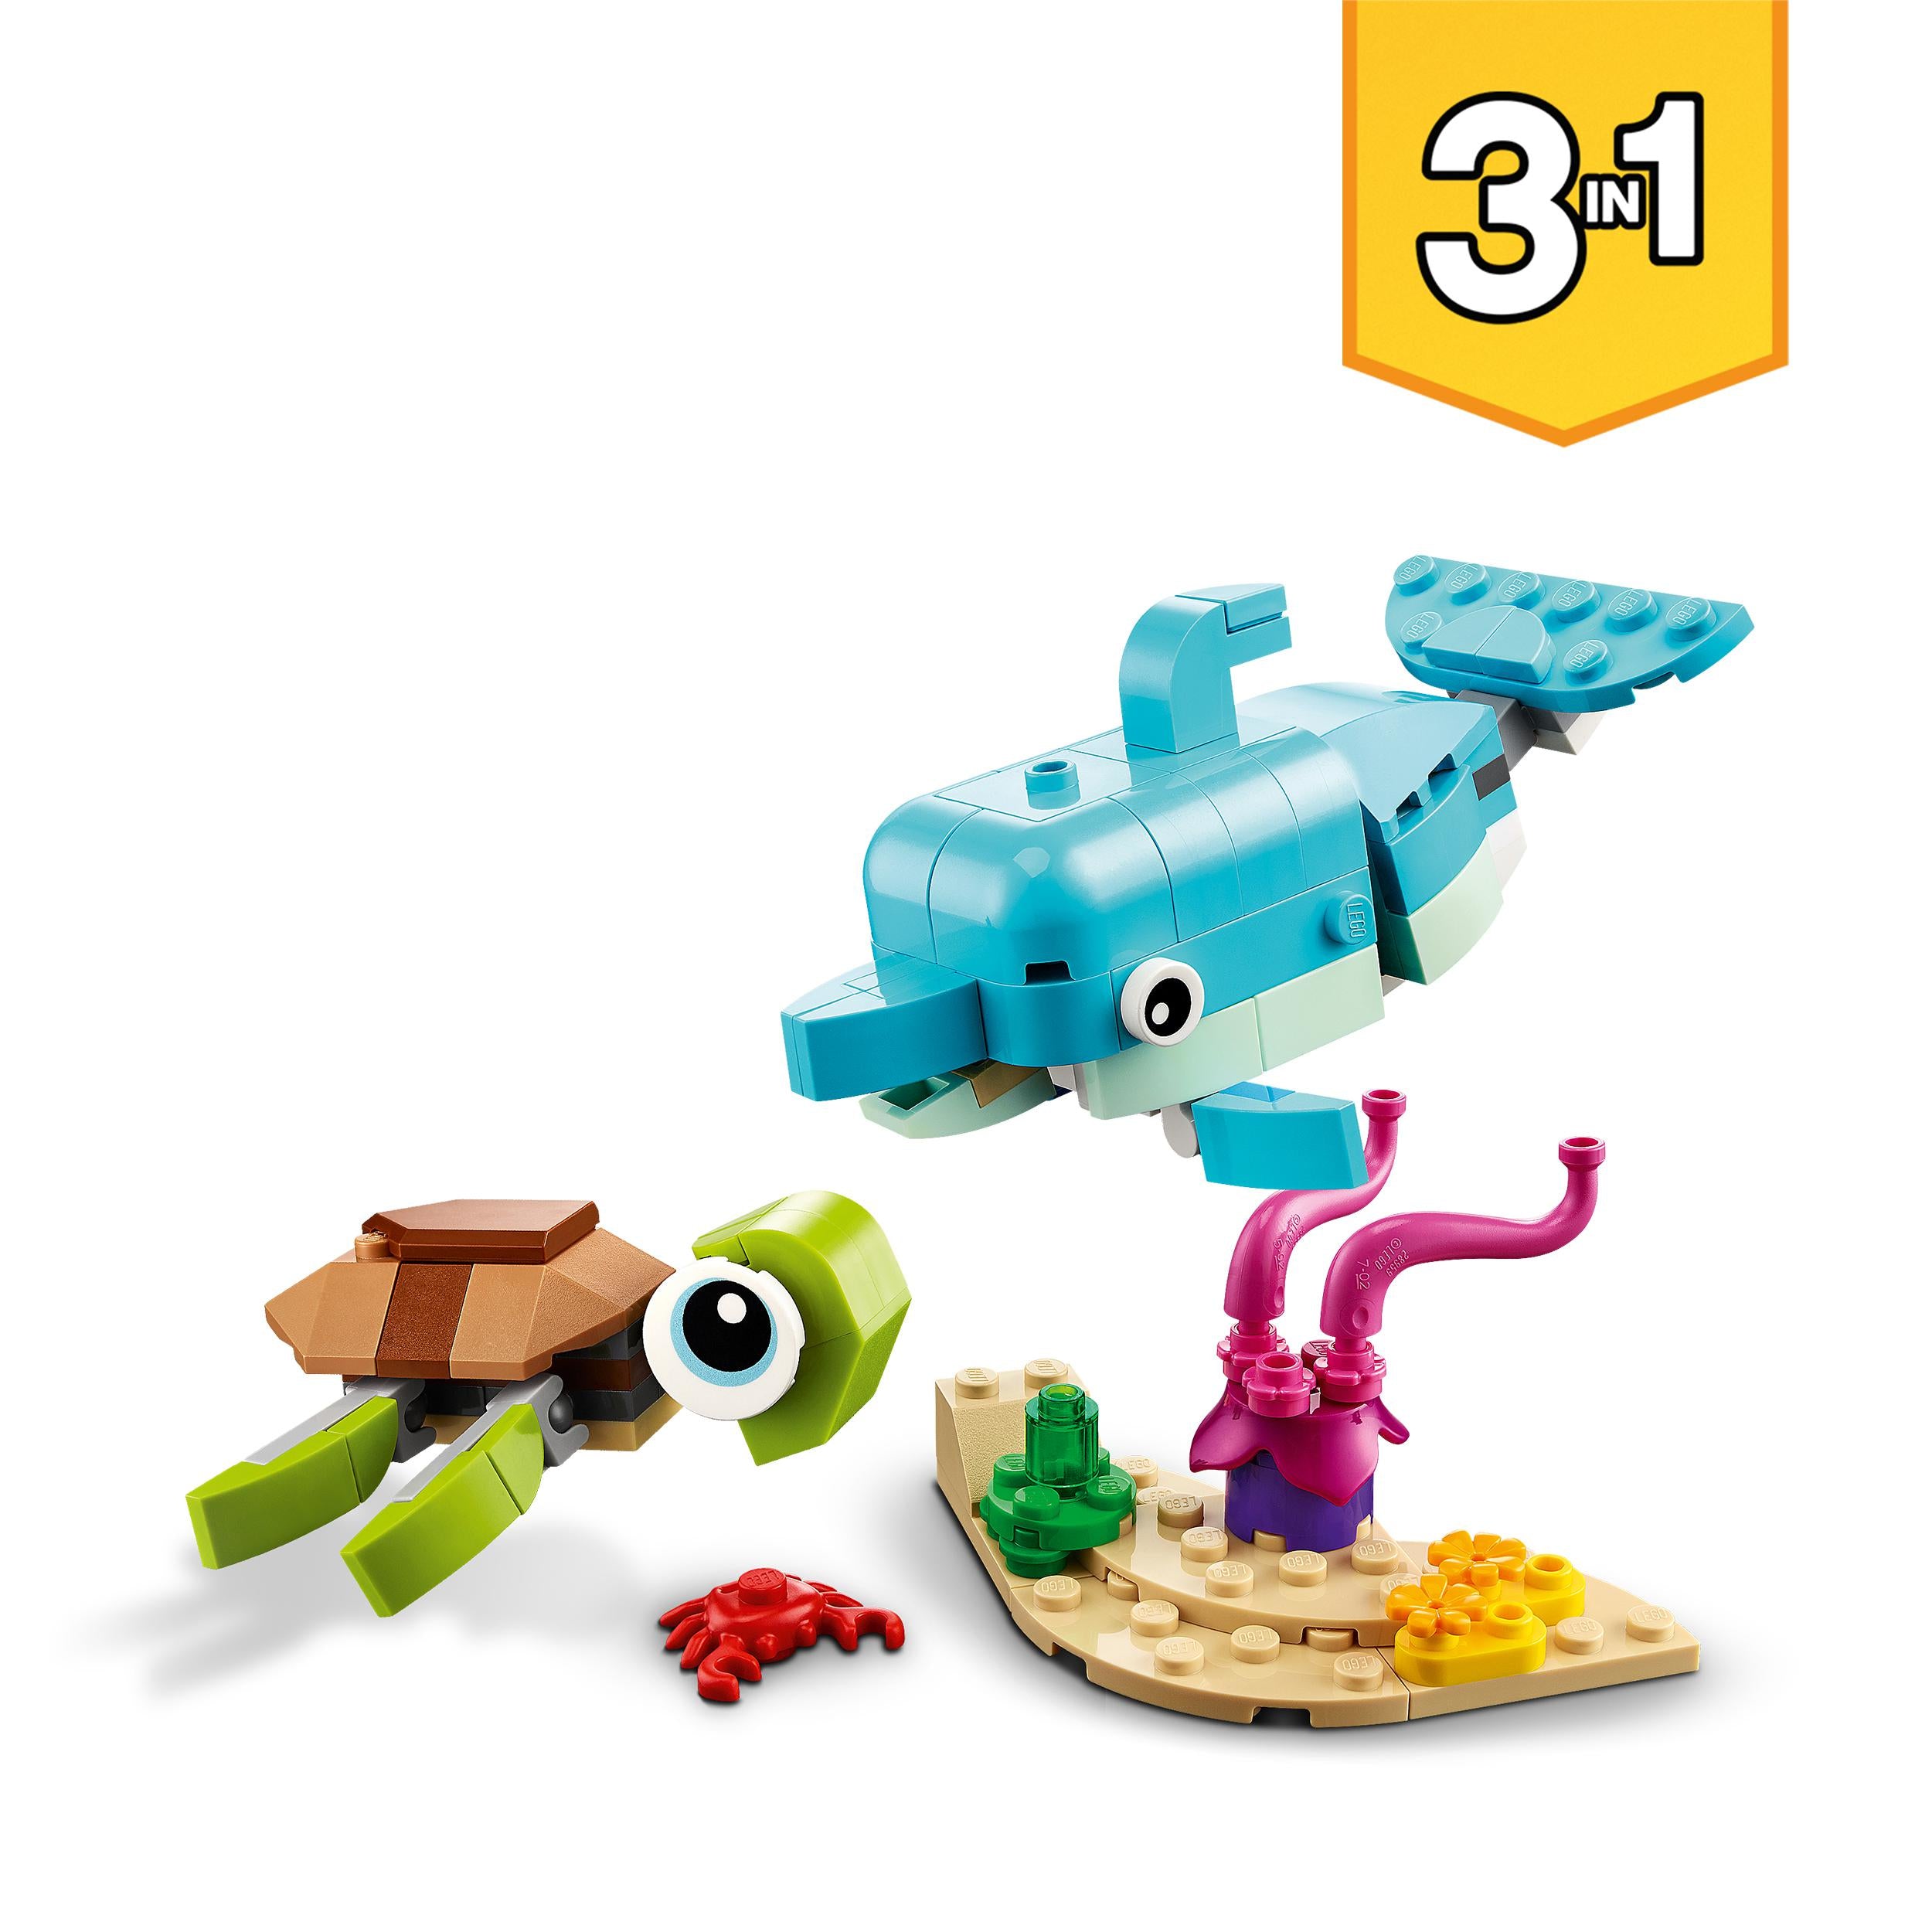 LEGO 31128 Creator 3in1 Dolphin and Turtle to Seahorse Toy Figures Building Set, Sea Animal Toys for Kids 6 Plus Years Old